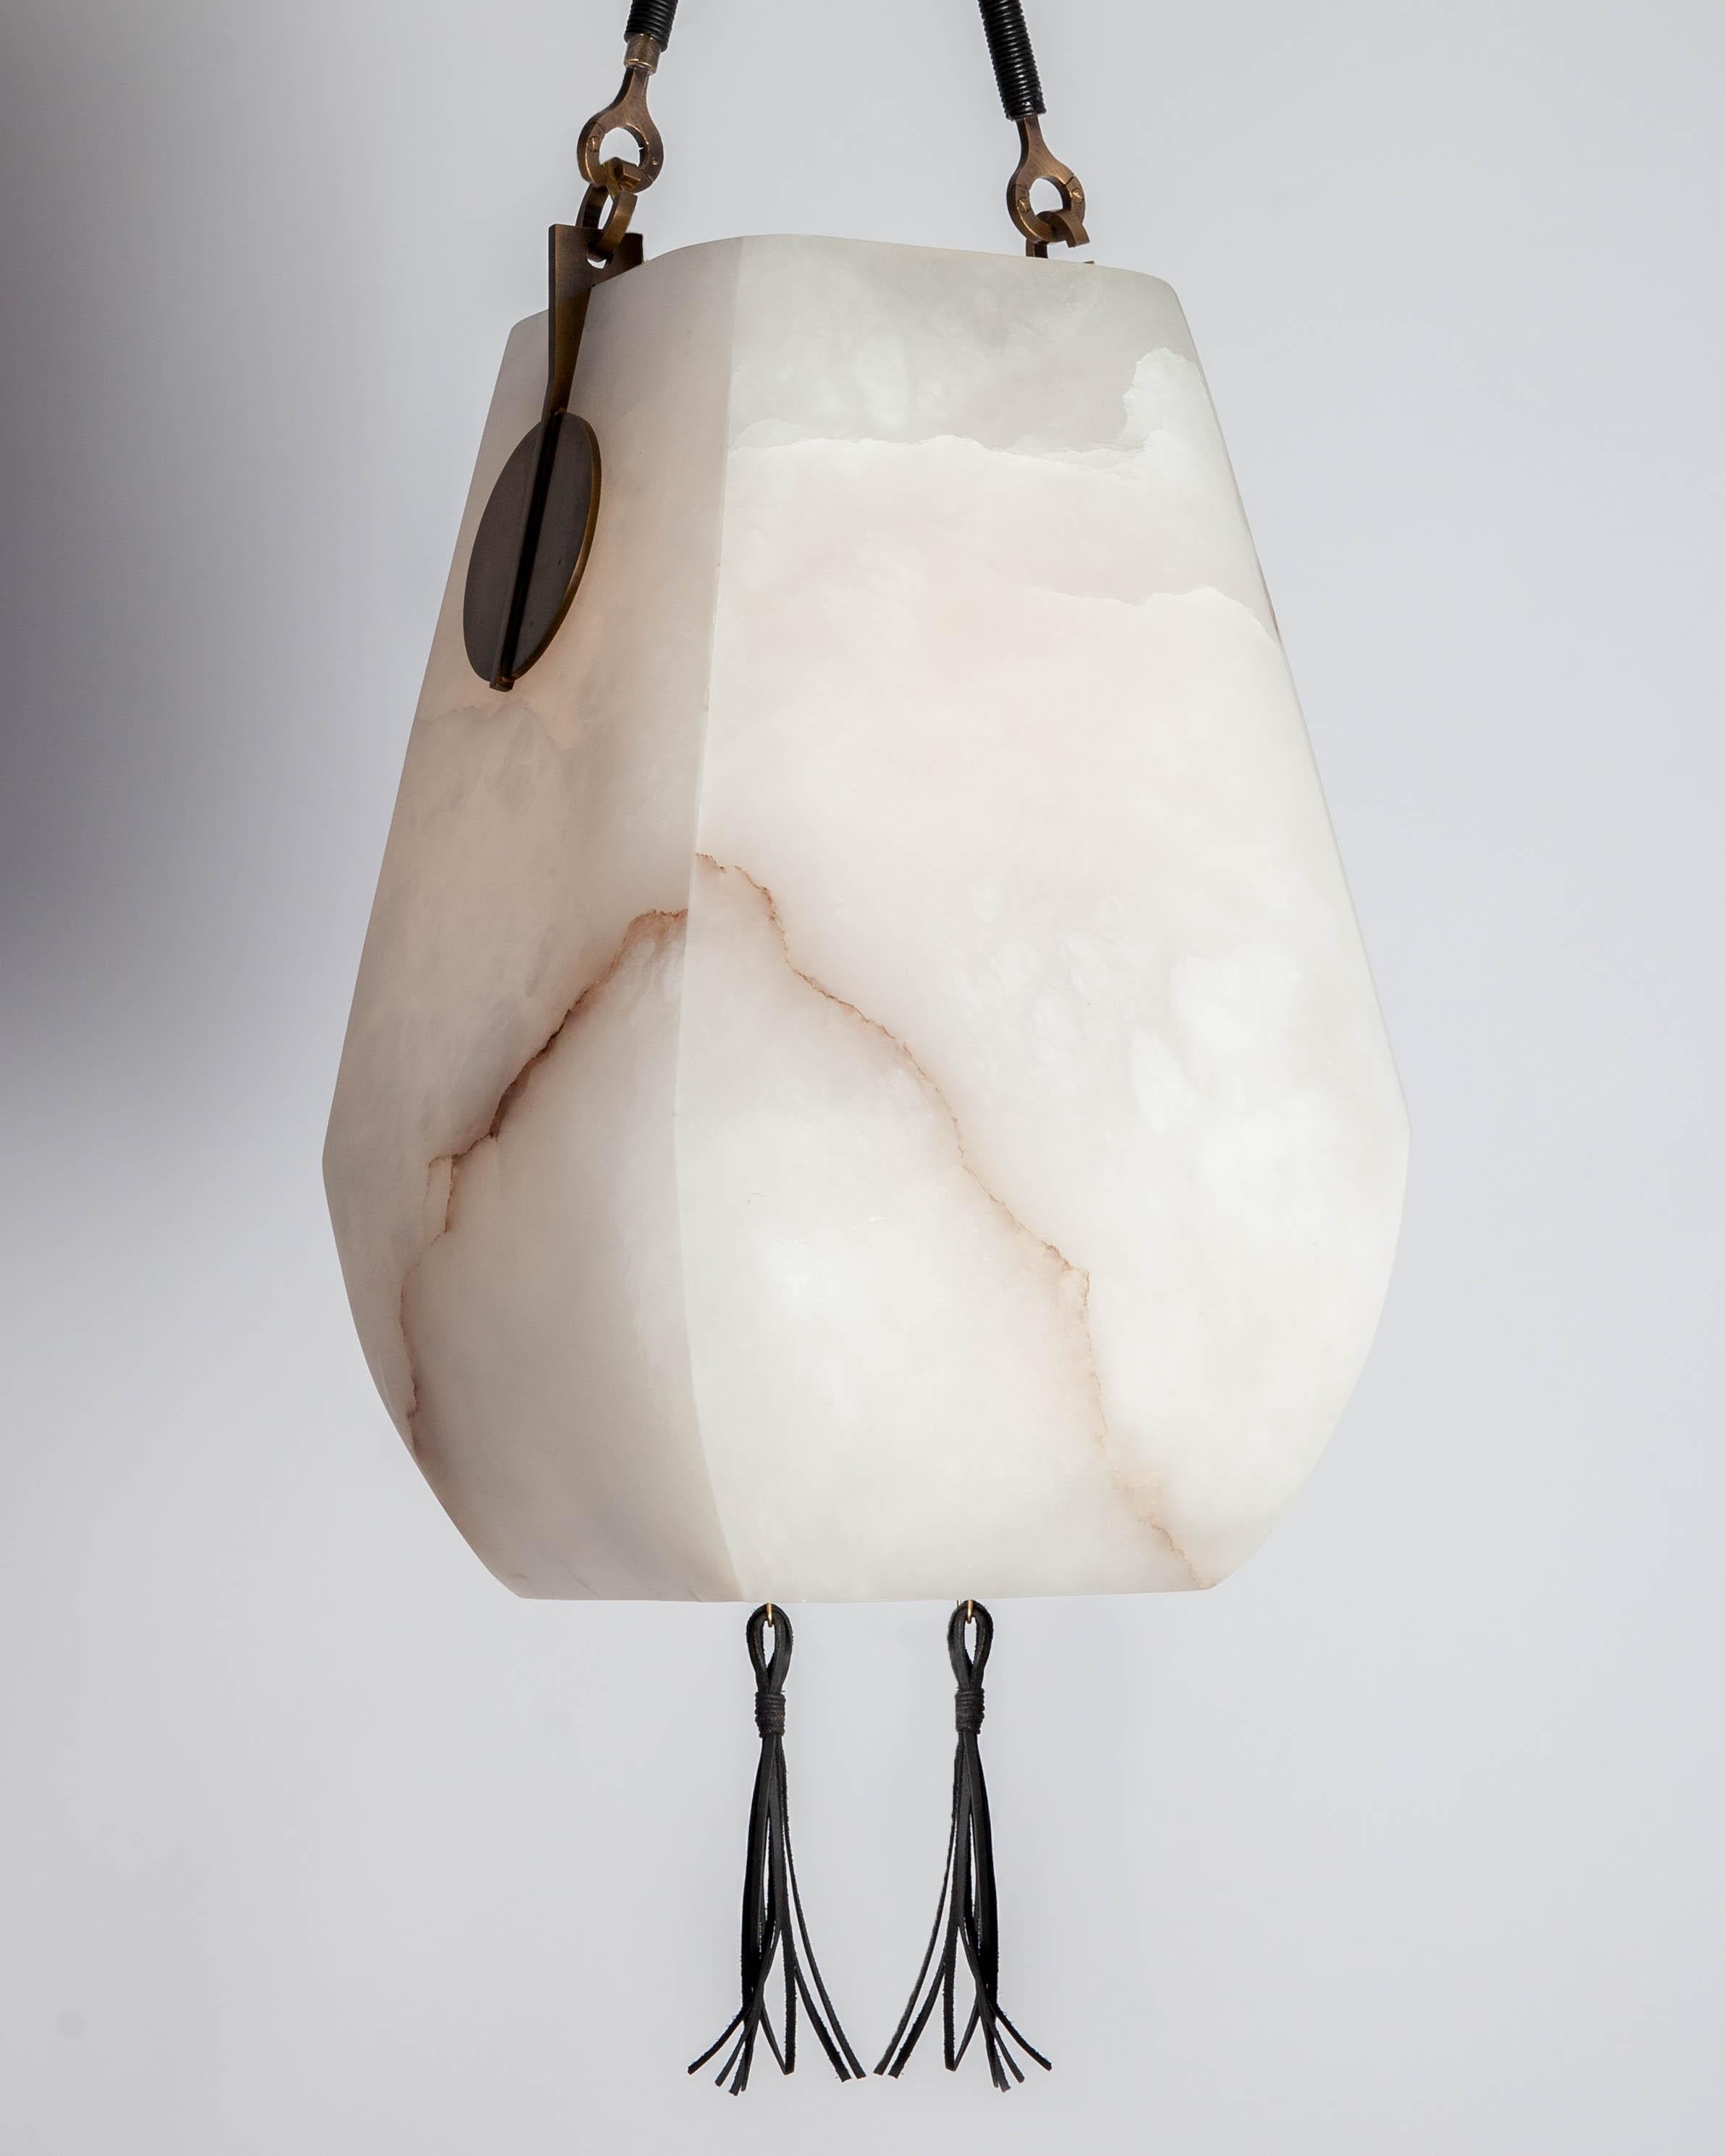 MHL4520
A hanging lantern with a hand-carved, veined white alabaster 'basket' shade, mounted with brass shields and suspended by slender hooks and a milled canopy. Each hook is wrapped in leather cord, and two leather tassels descend through an